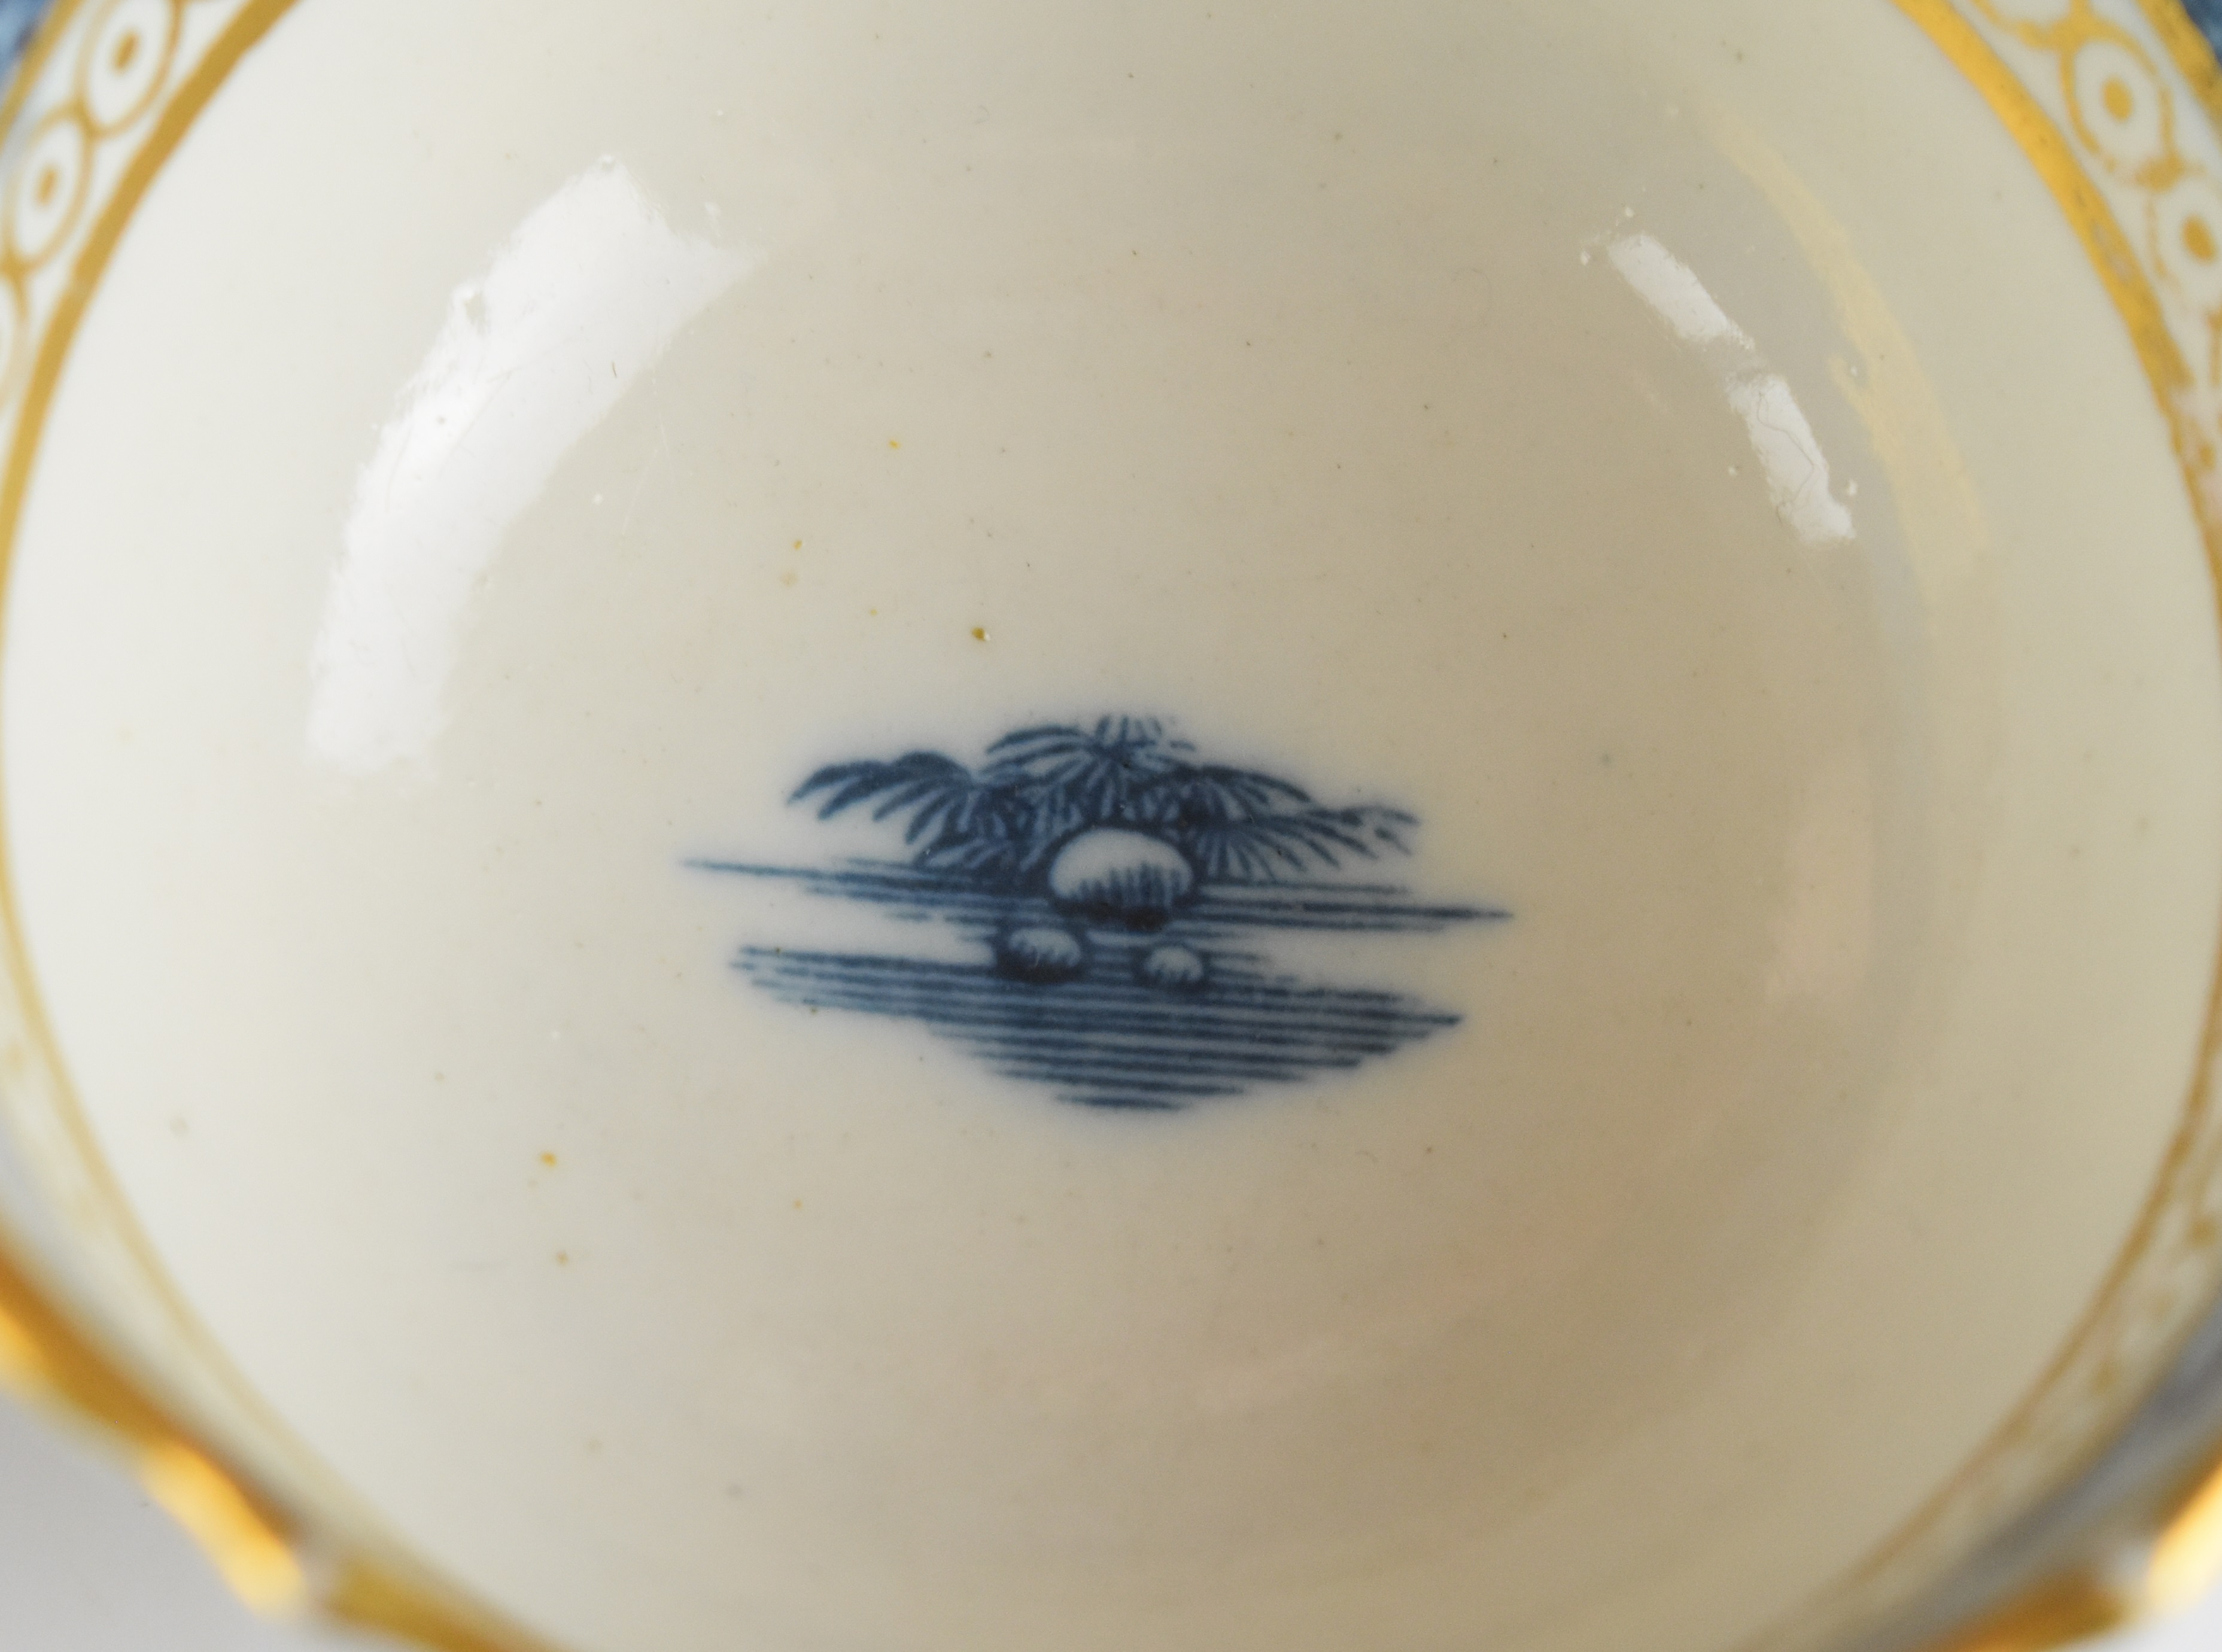 Caughley tea bowl, cup, saucer and pedestal dish, largest diameter 20cm - Image 4 of 8